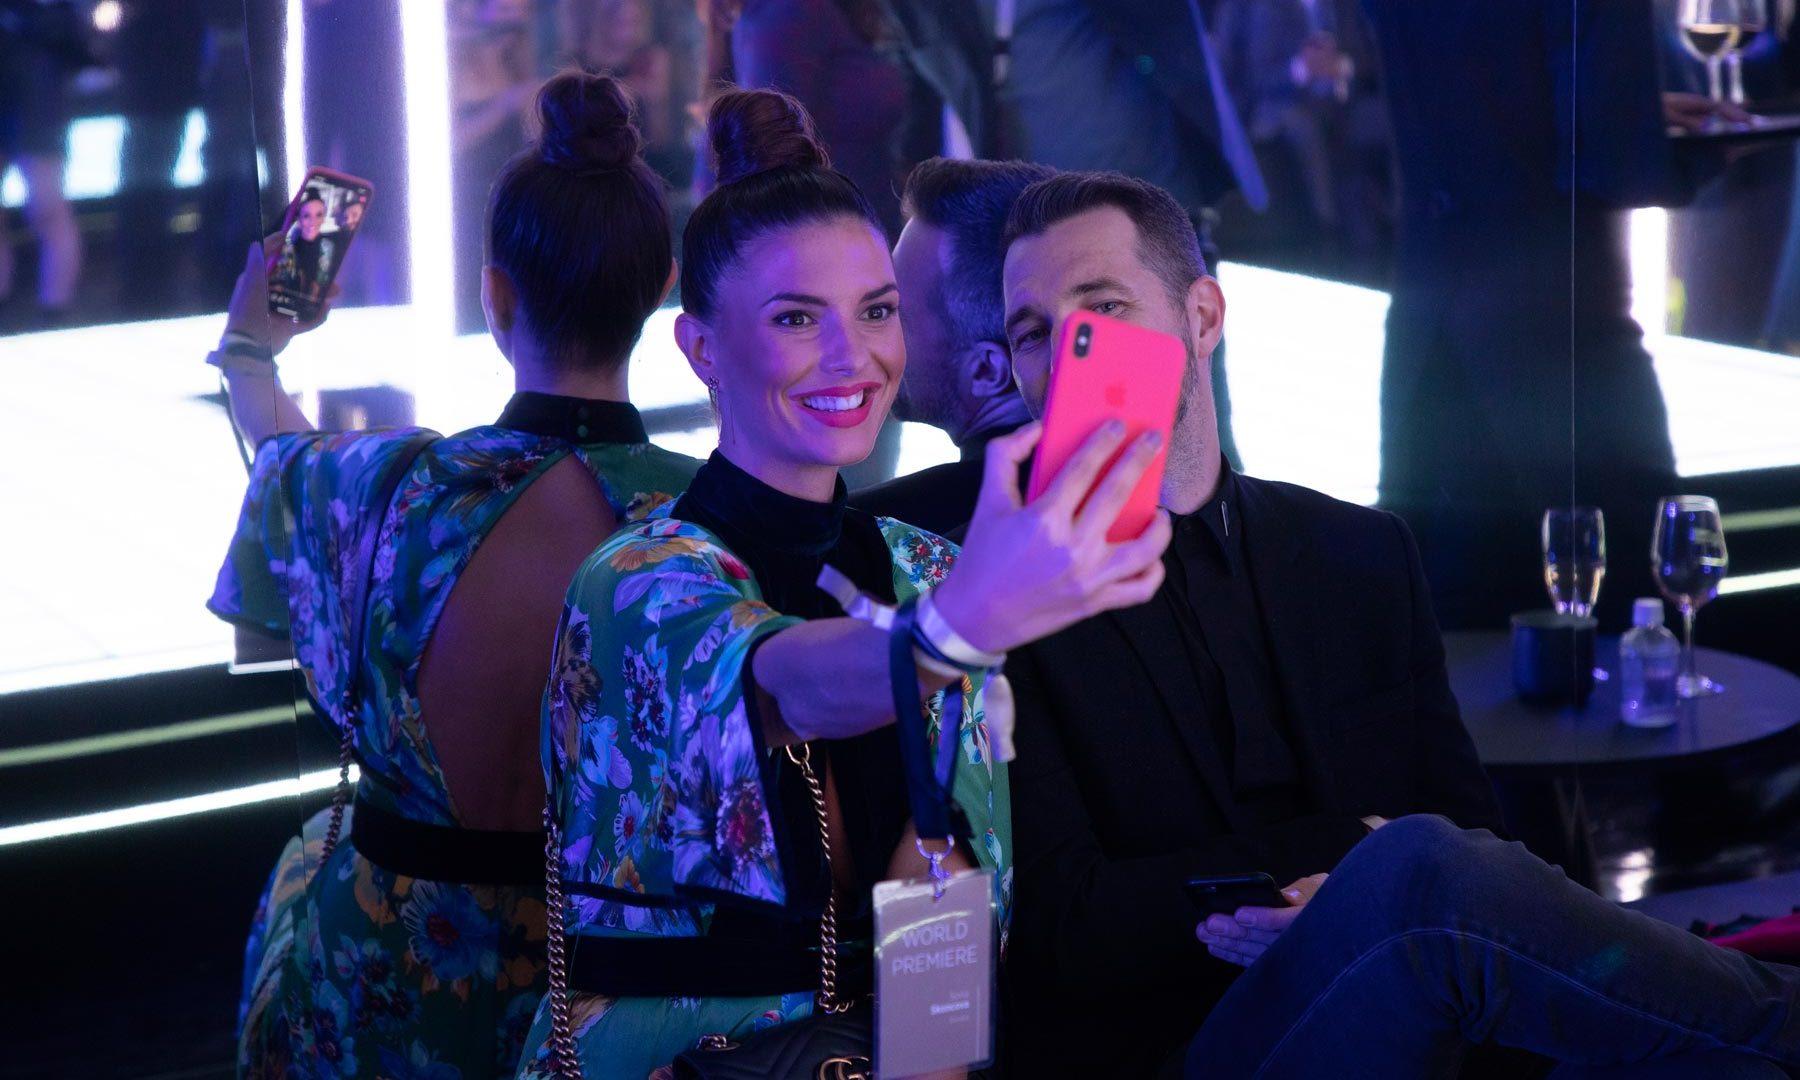 A man and a woman in chic evening wear take a selfie together.